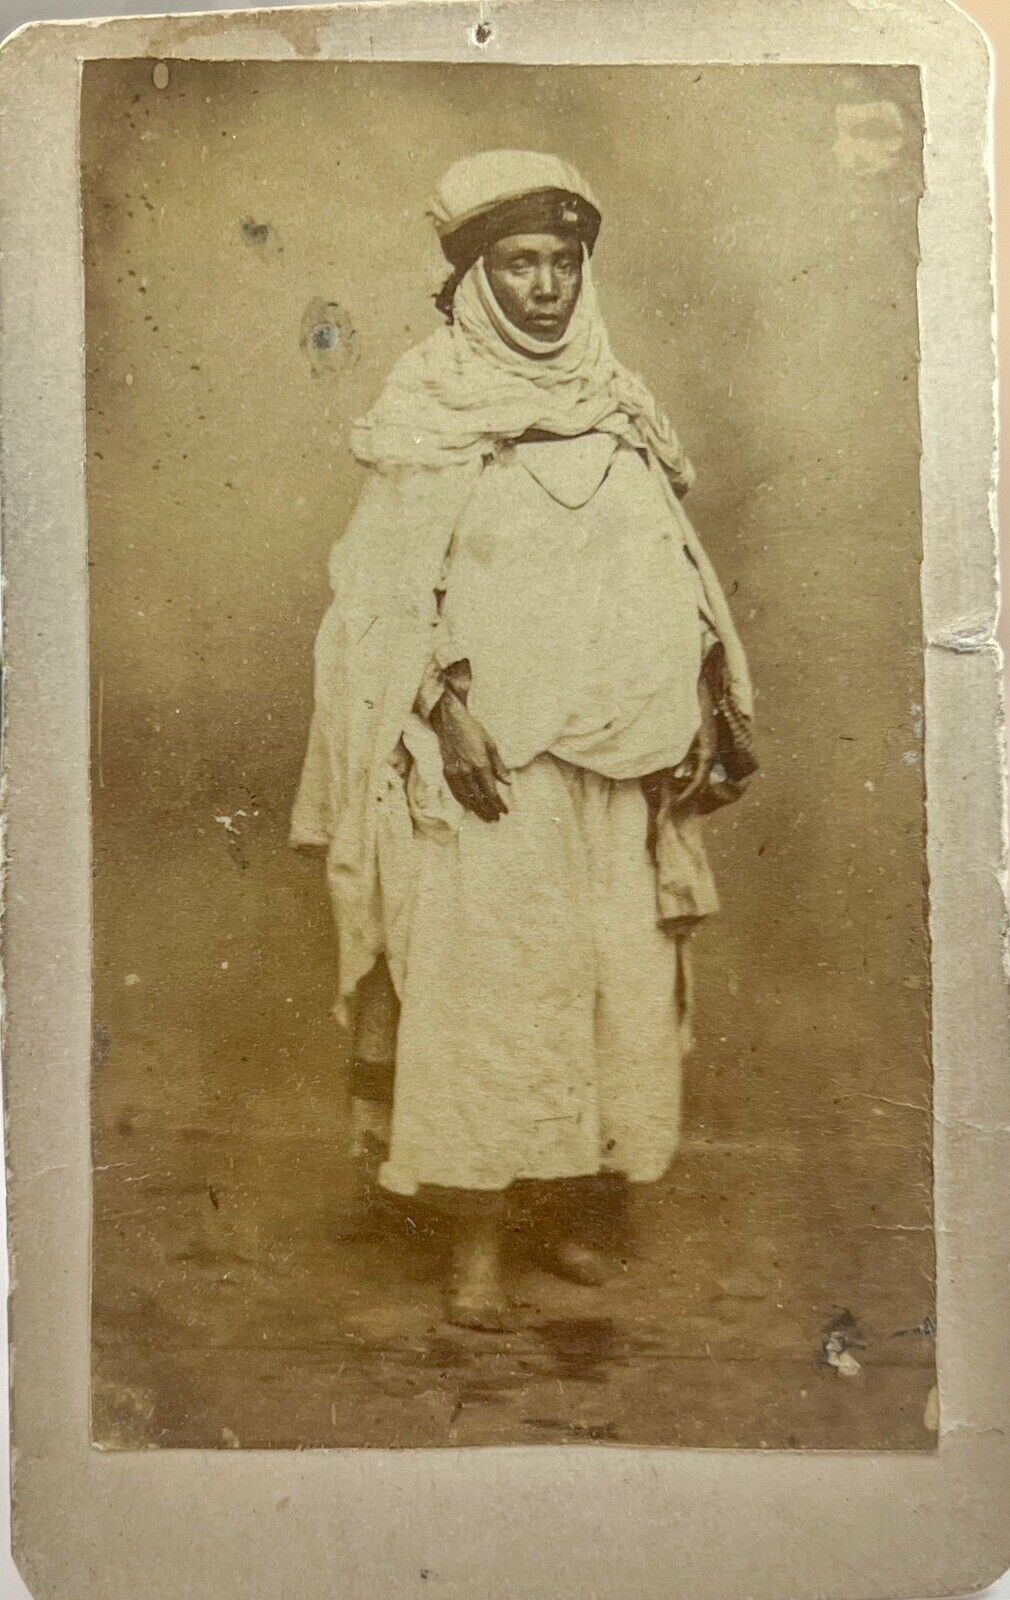 Rare, Sensitive, Emotional CDV Portrait of an African Woman in Nomadic Dress